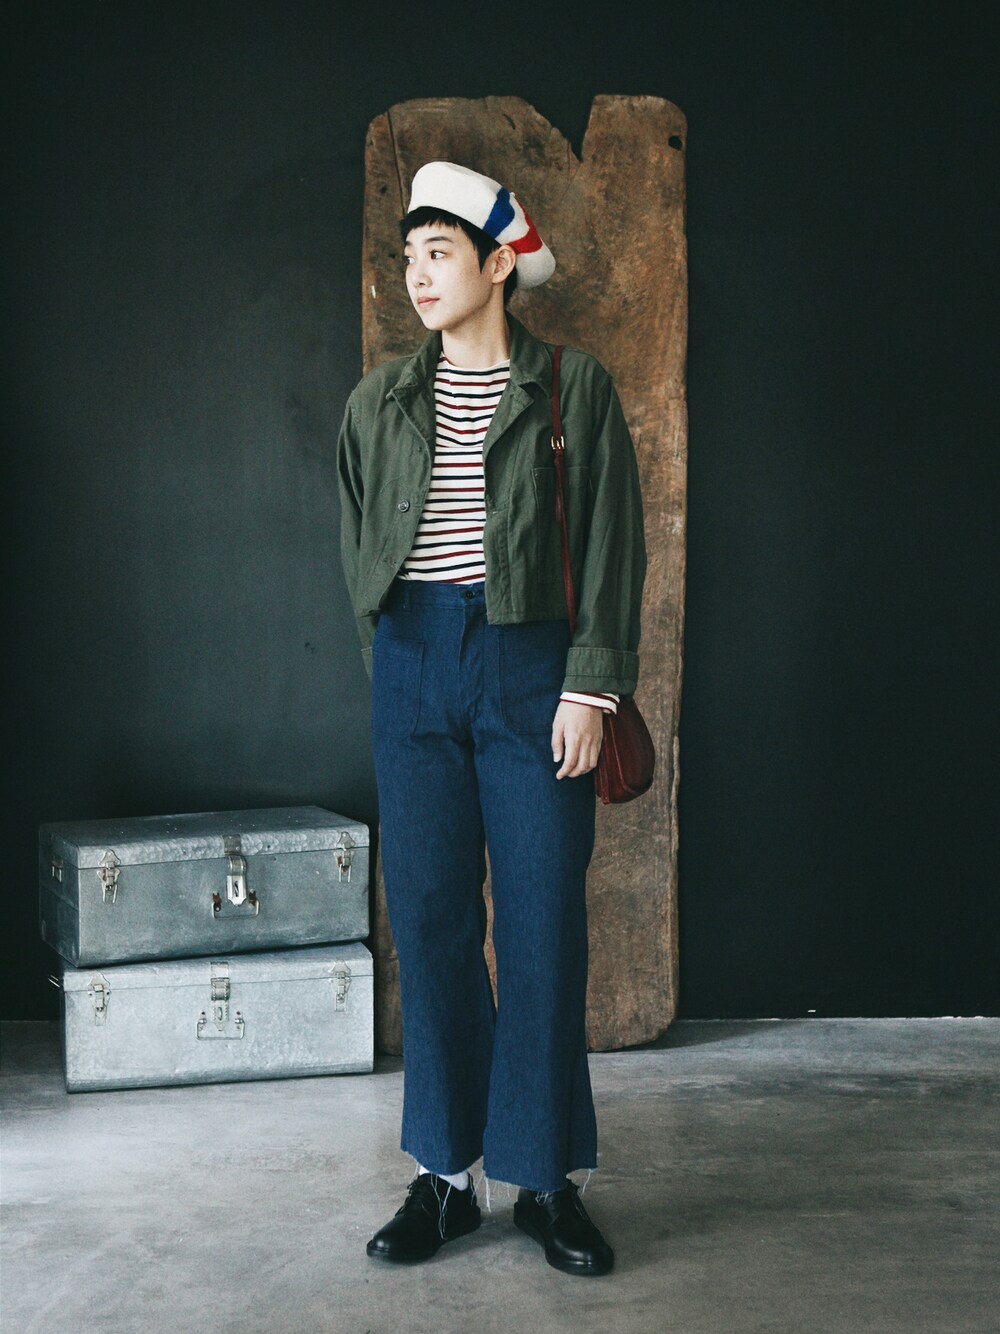 AROOMMODELさんの「A Room Model - F5 Remade US Military Jacket（A ROOM MODEL）」を使ったコーディネート